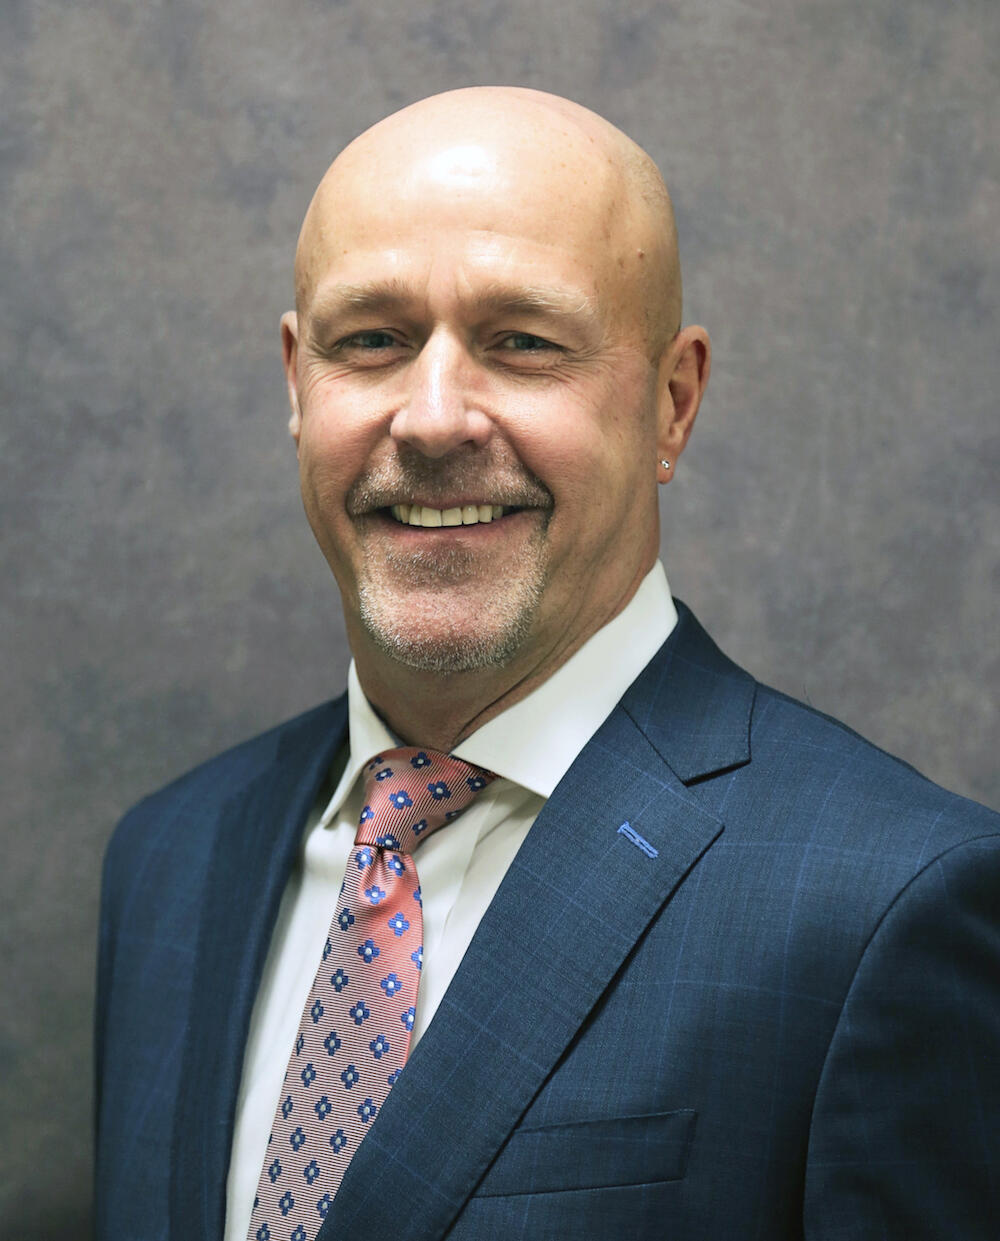 Brent C Smith, Ph.D., CoStar Group Endowed Chair in Real Estate Analytics at the VCU School of Business. (Photo courtesy VCU School of Business)